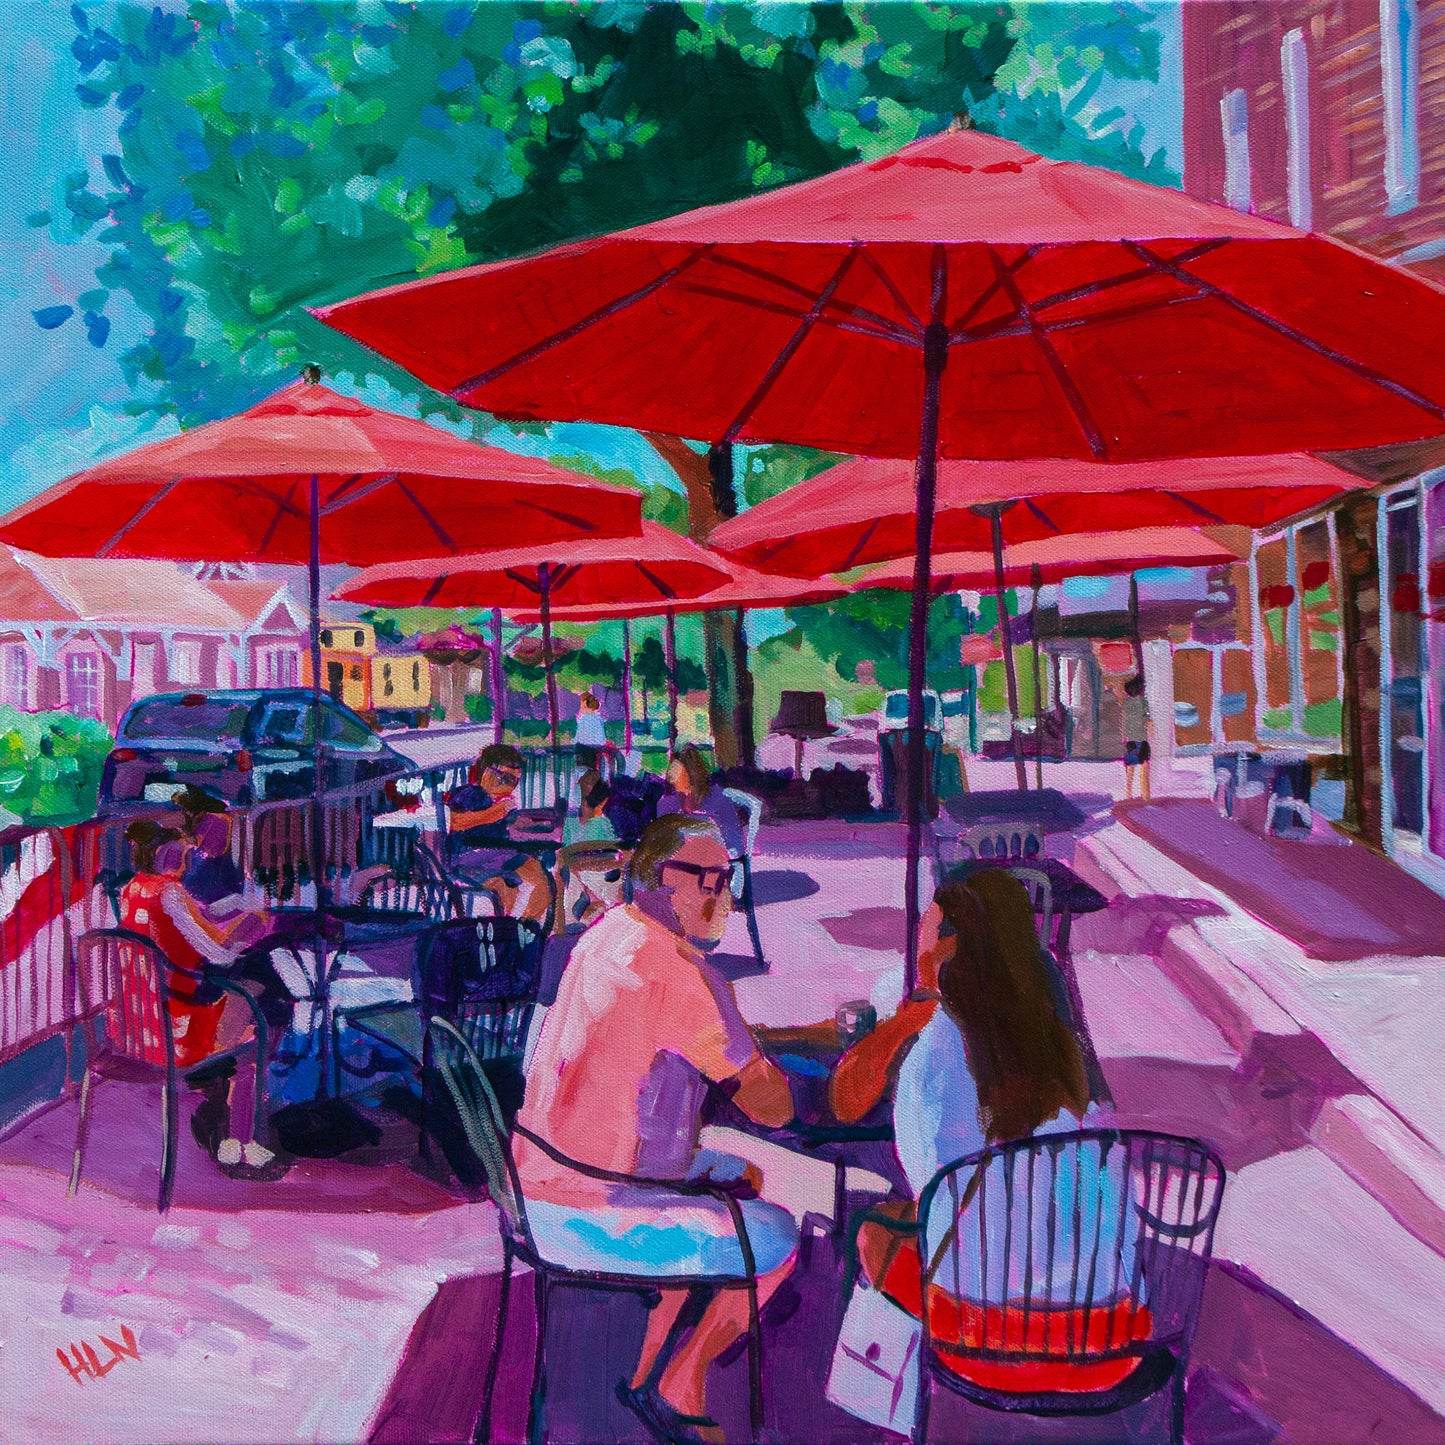 Impressionist painting of small town life, street cafe with red umbrellas based off of downtown Winter Garden Florida